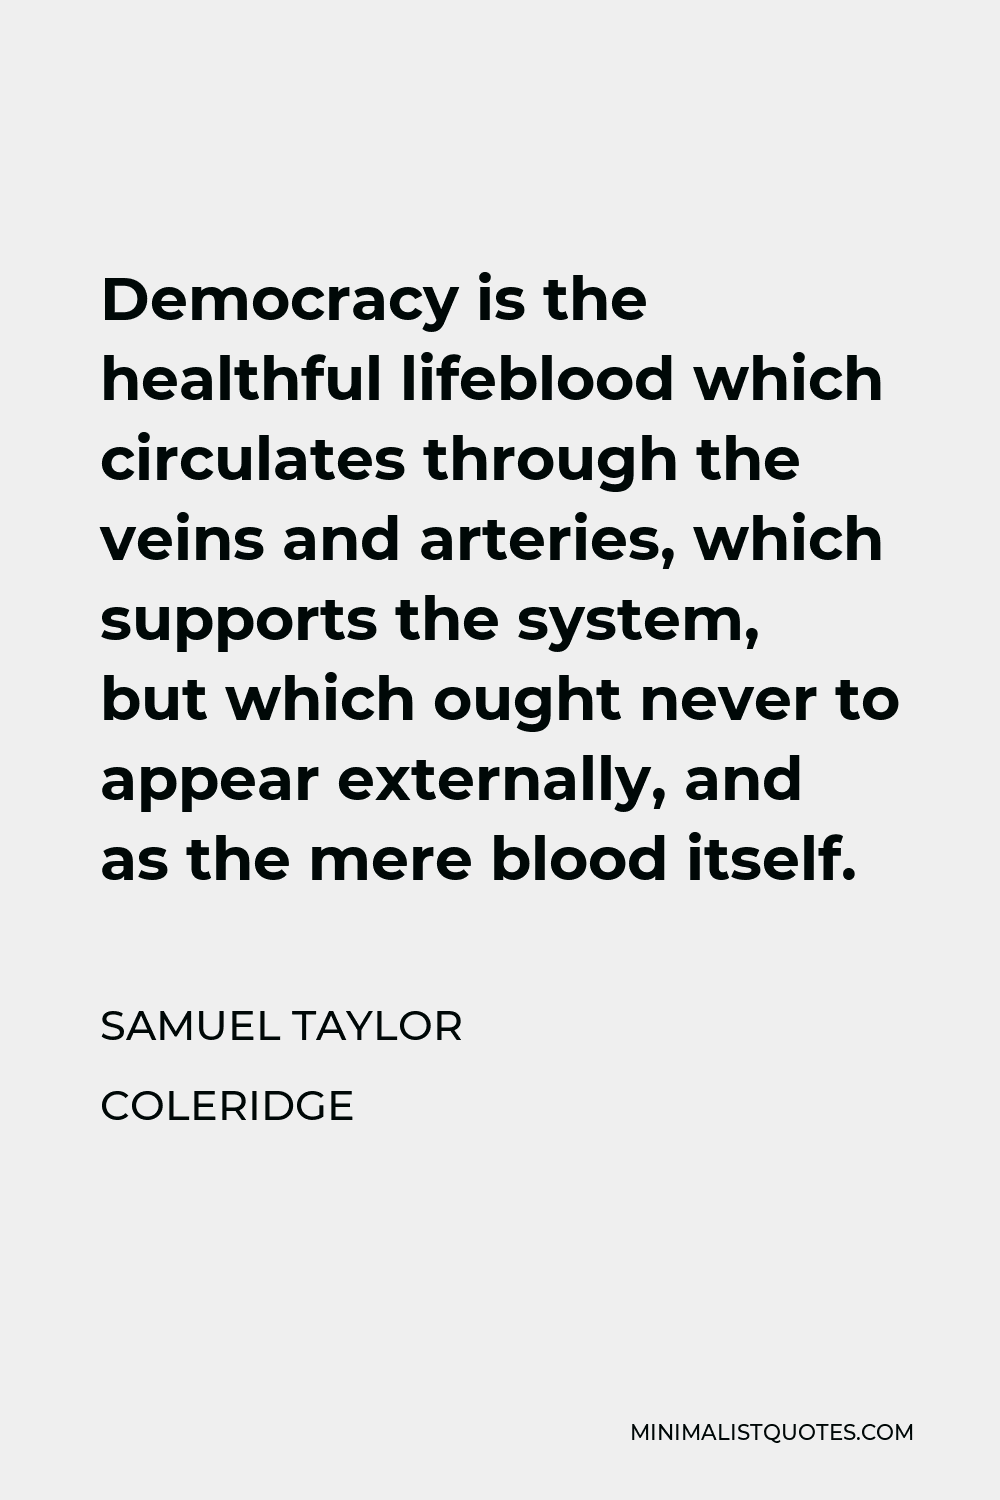 Samuel Taylor Coleridge Quote - Democracy is the healthful lifeblood which circulates through the veins and arteries, which supports the system, but which ought never to appear externally, and as the mere blood itself.